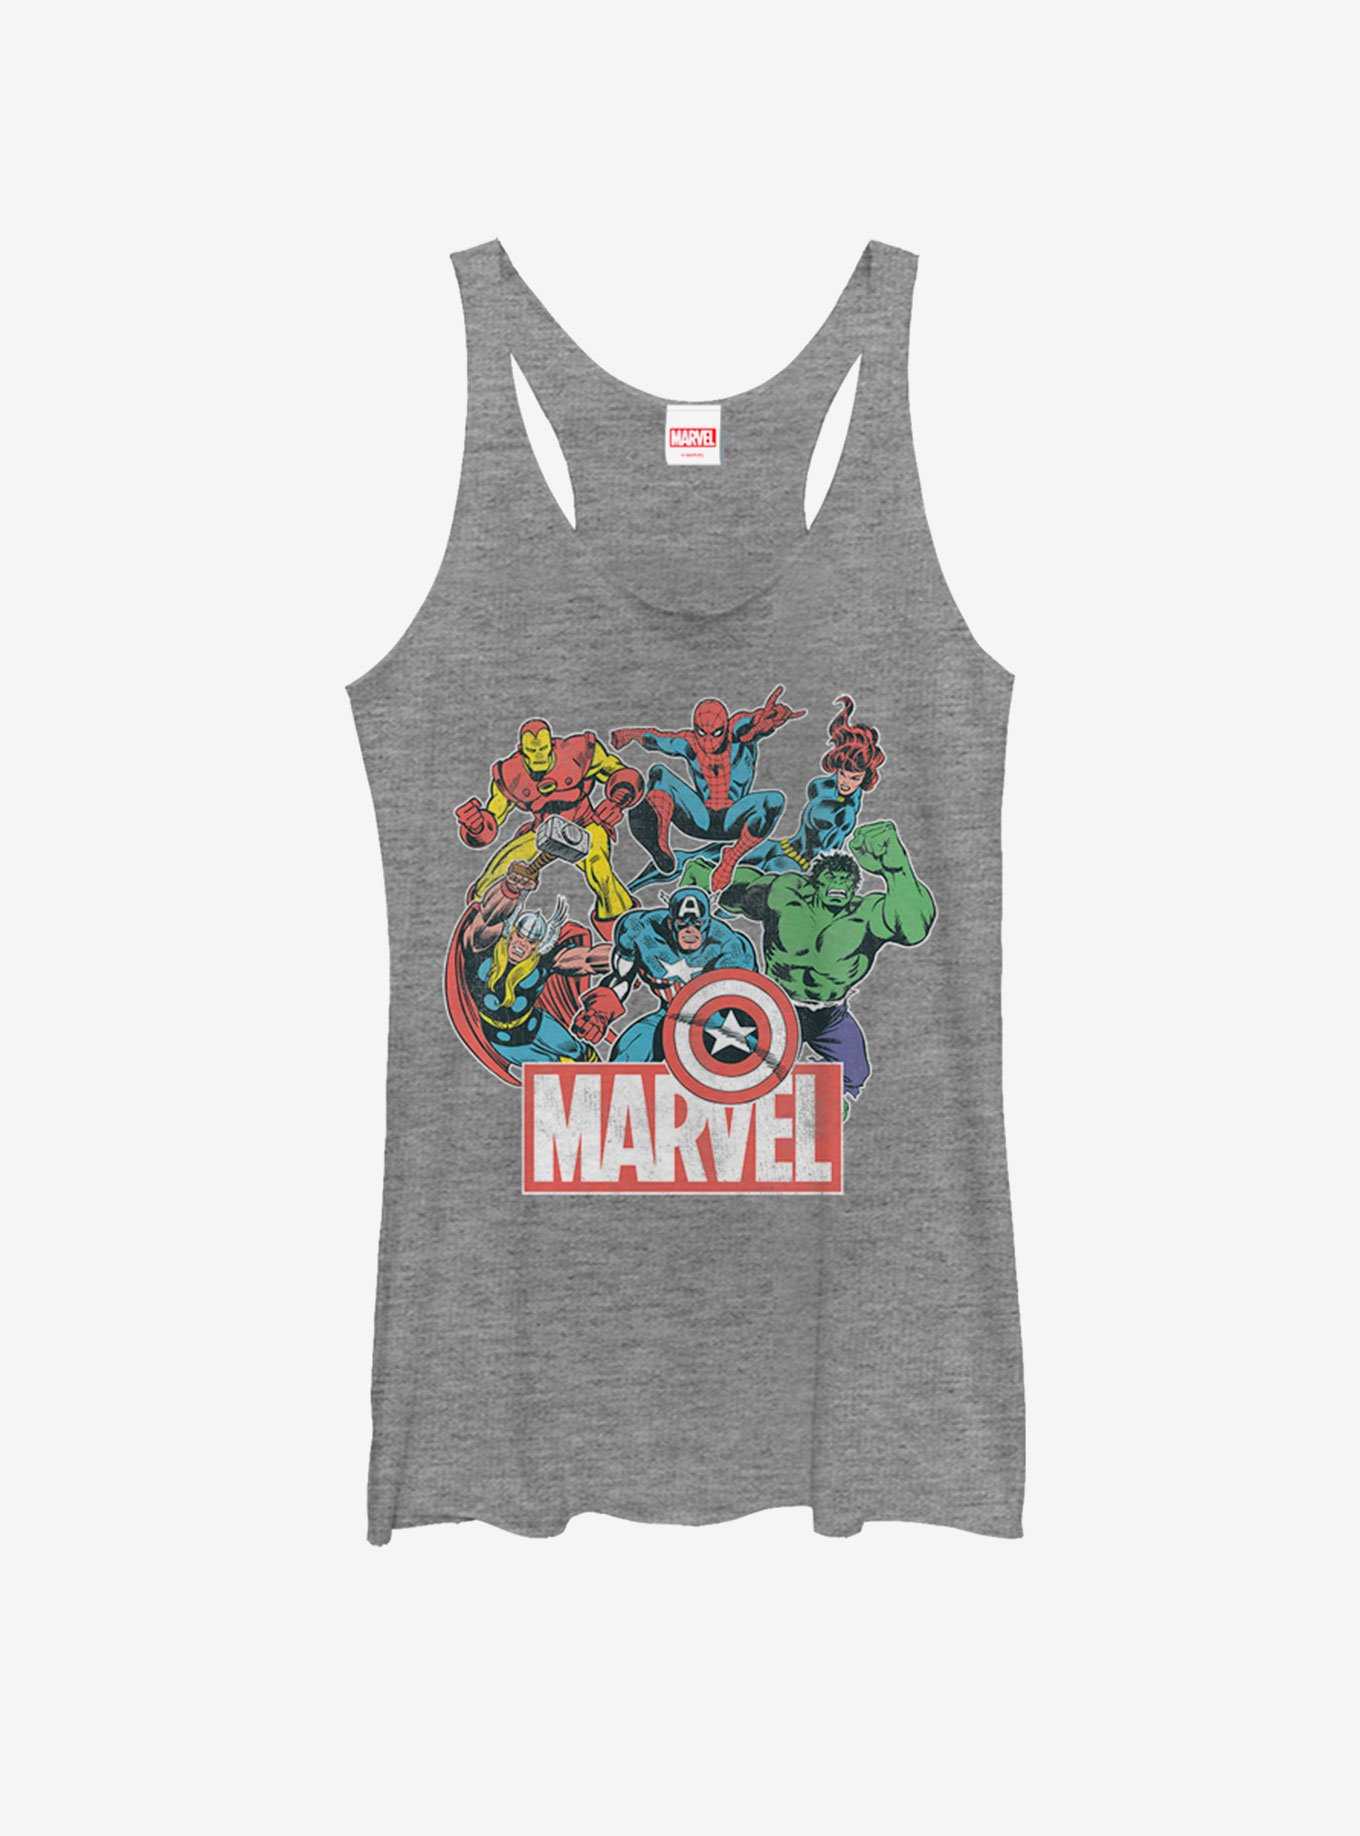 Marvel Heroes of Today Girls Tank, , hi-res